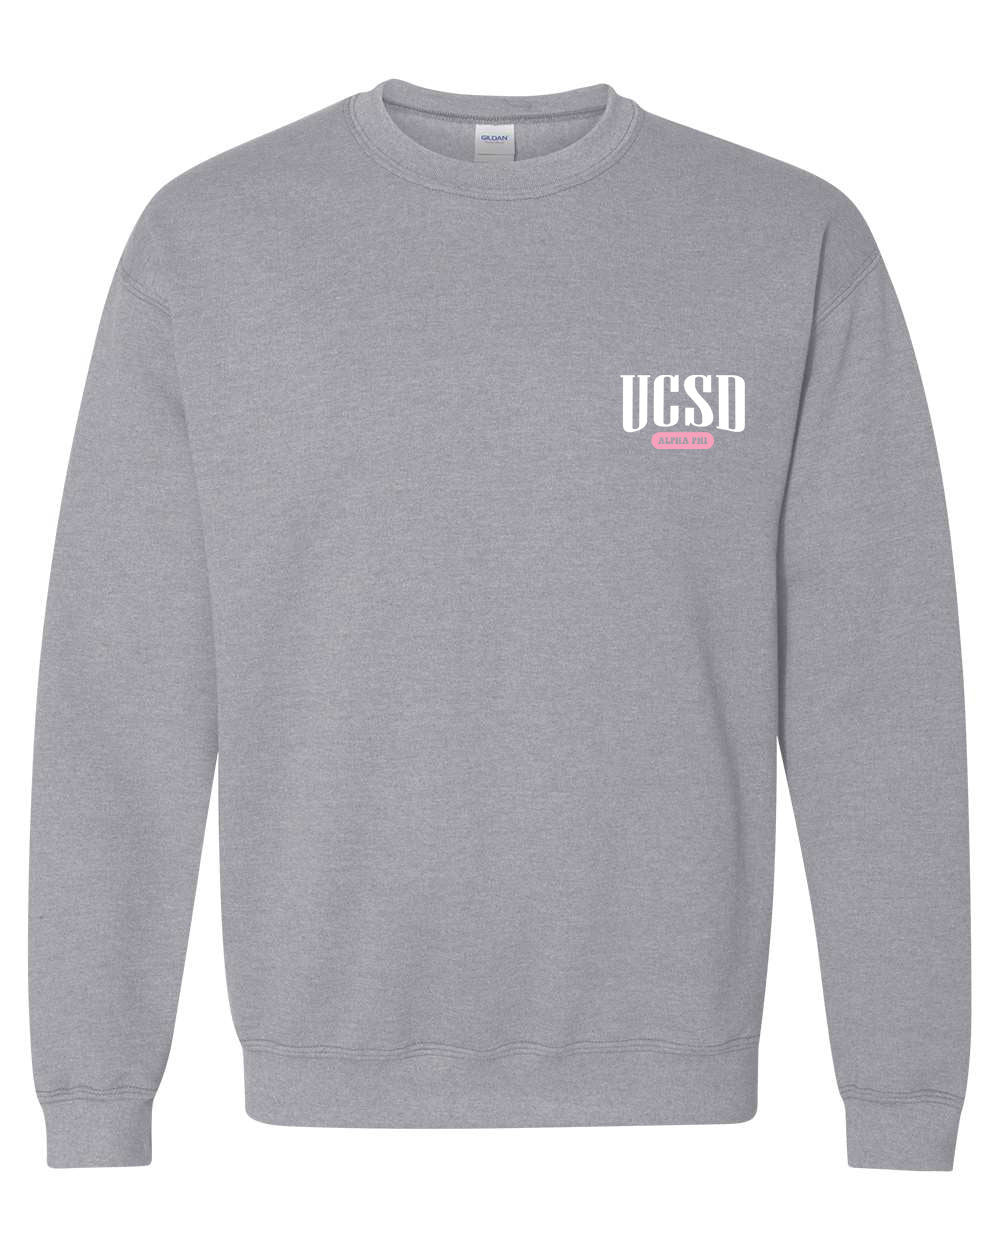 a grey sweatshirt with a white and pink logo on the chest